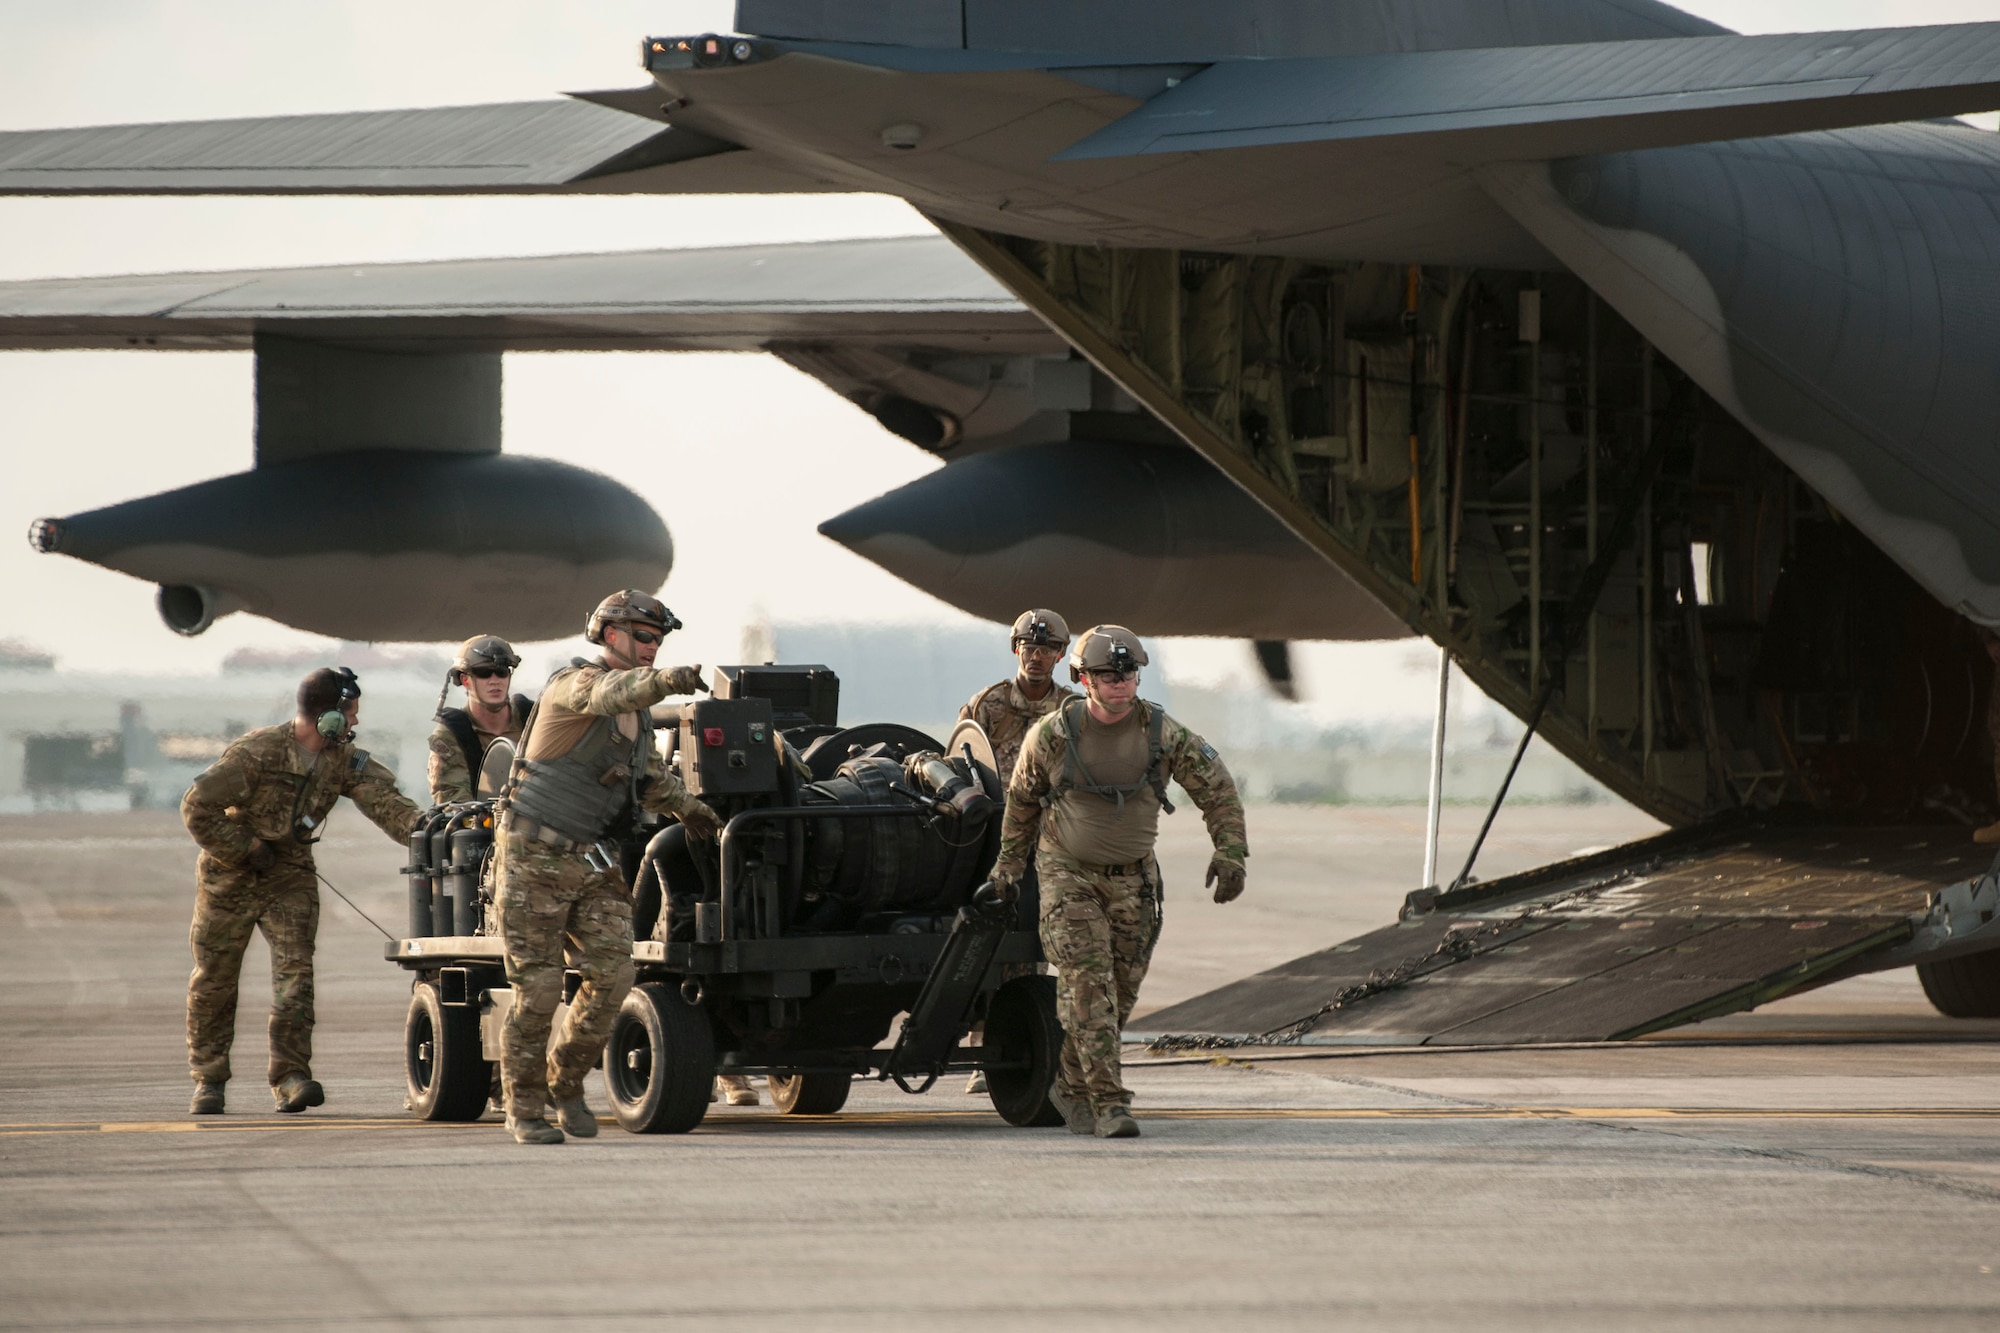 Airmen from the 18th Logistics Readiness Squadron forward area refueling point team and 1st Special Operations Squadron unload a forward area manifold cart from an MC-130H Combat Talon II July 28, 2016, at Kadena Air Base, Japan. The 18th LRS conducted a hot refueling exercise on the flight line to demonstrate forward operations capability. (U.S. Air Force photo by Senior Airman Peter Reft)